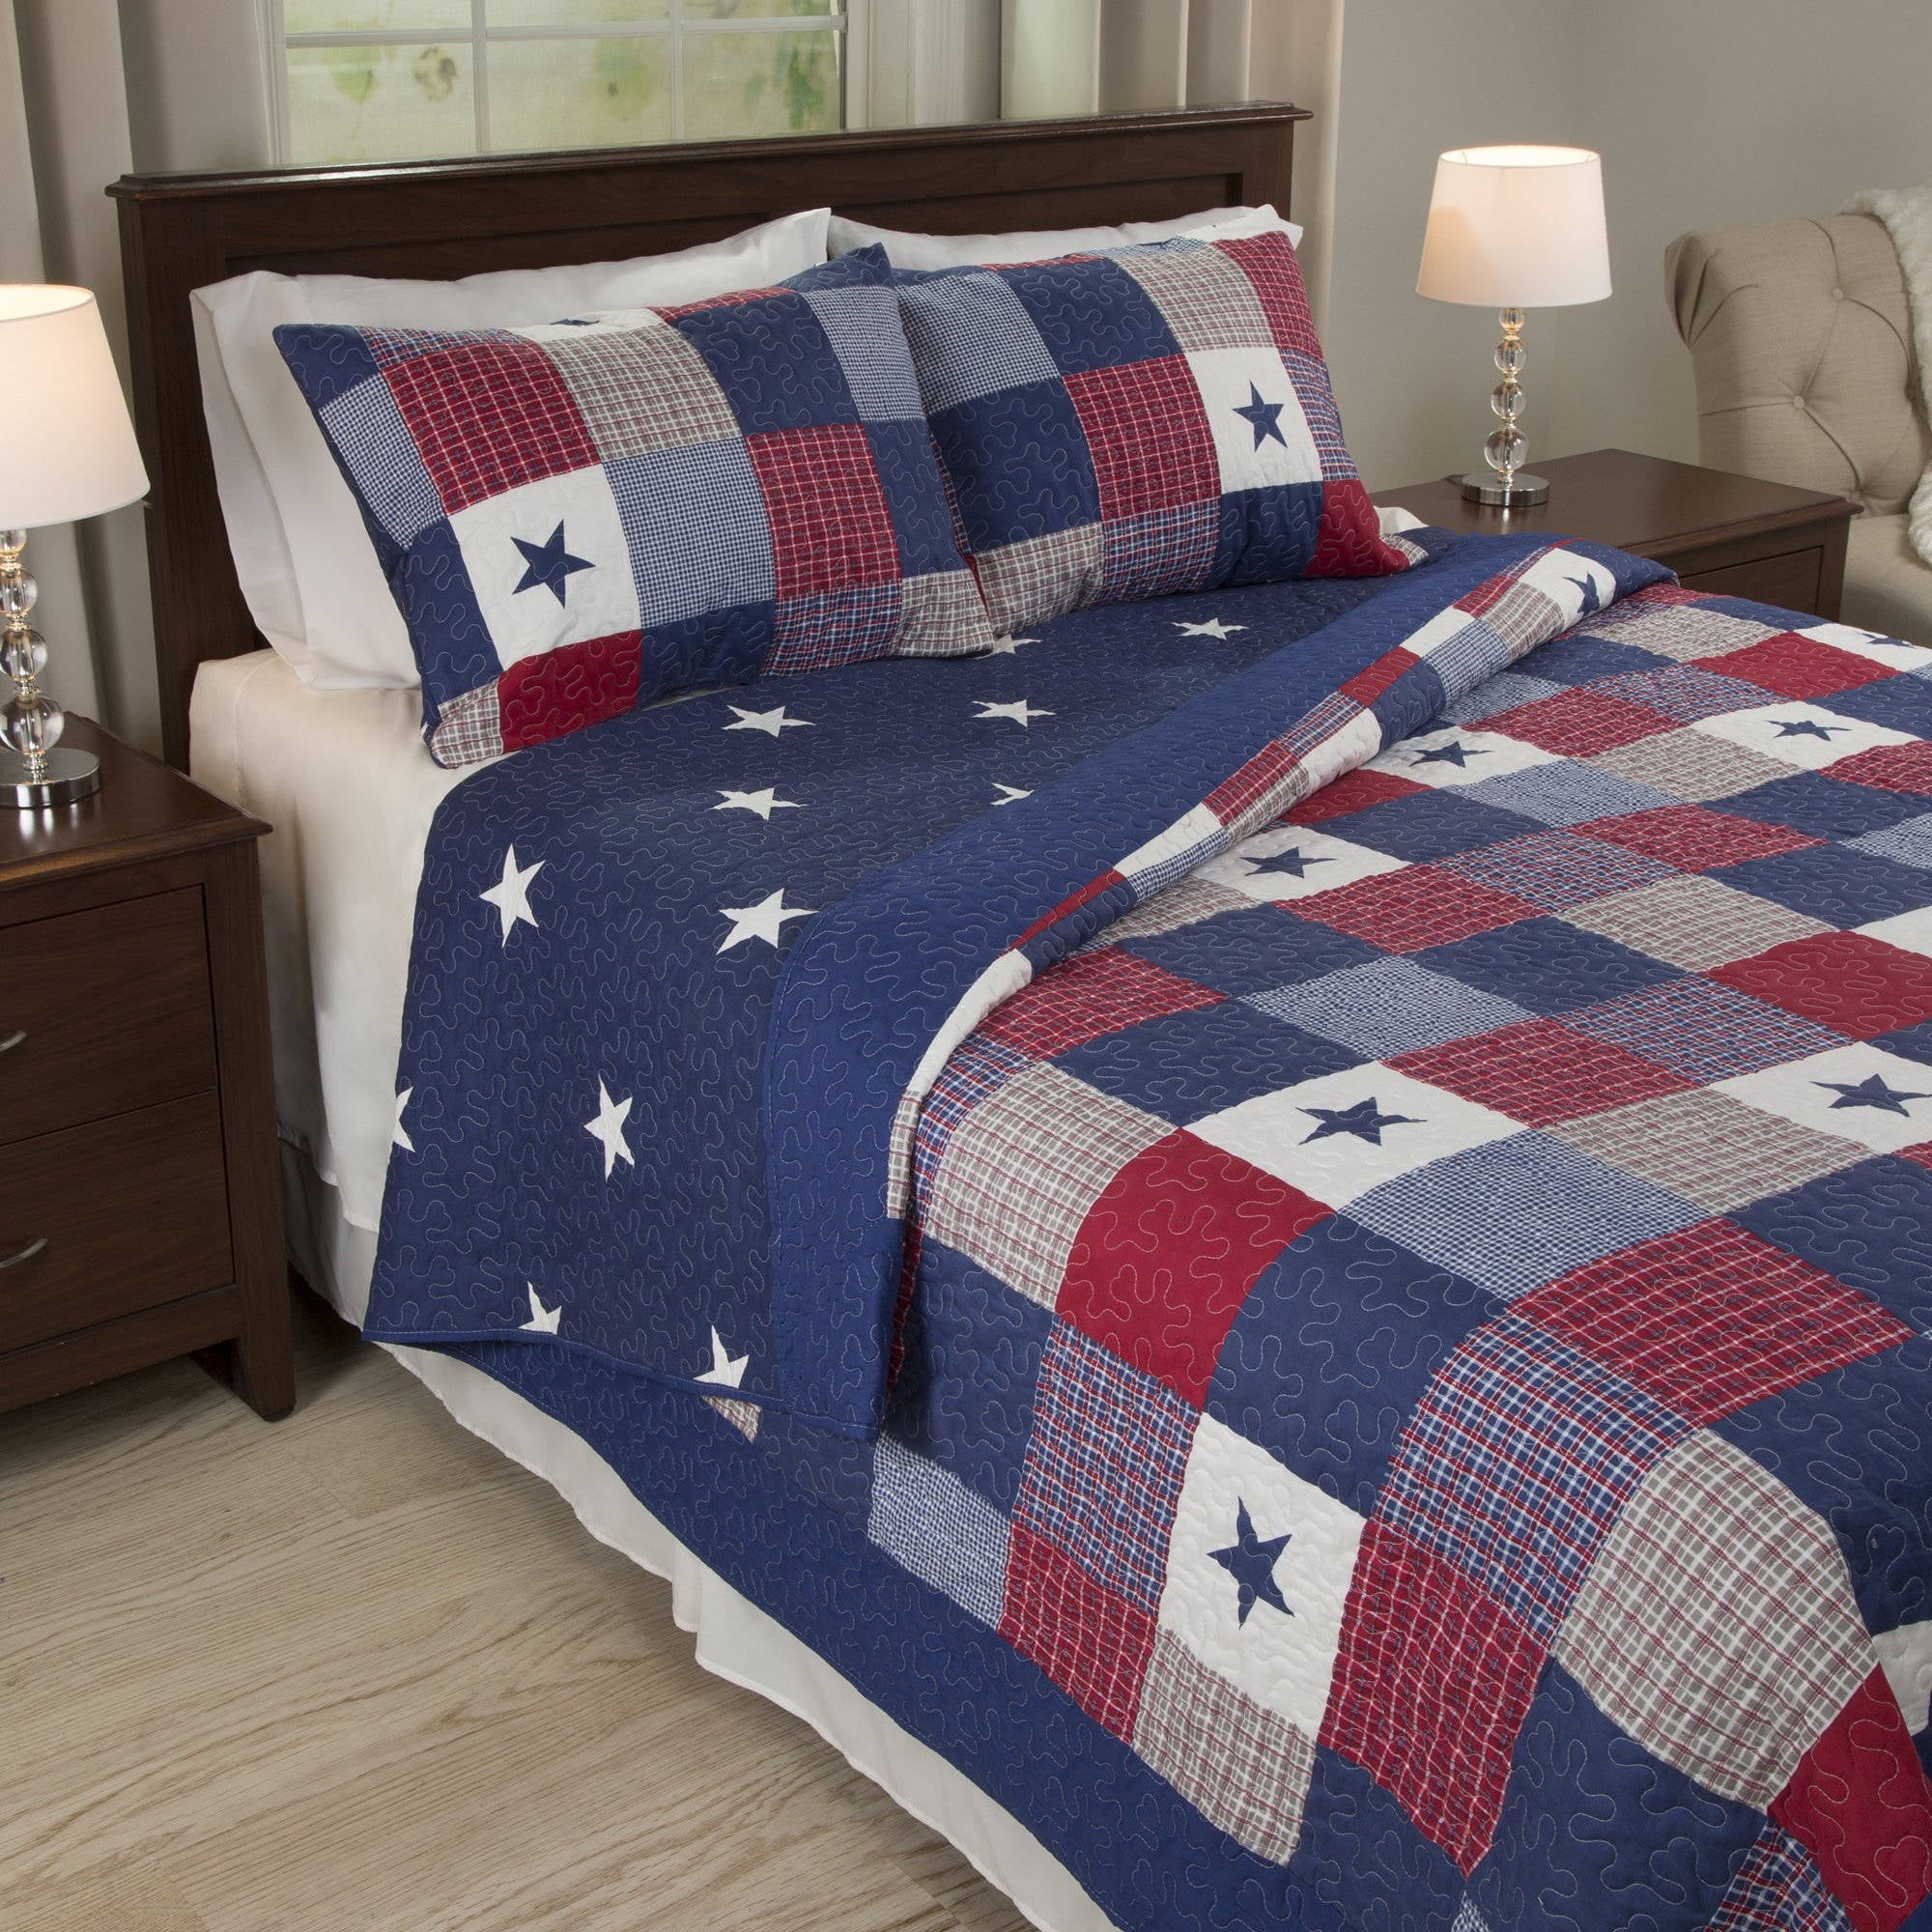 Full/Queen or King Quilt Red Plaid Patchwork Bedspread Bedding Set 